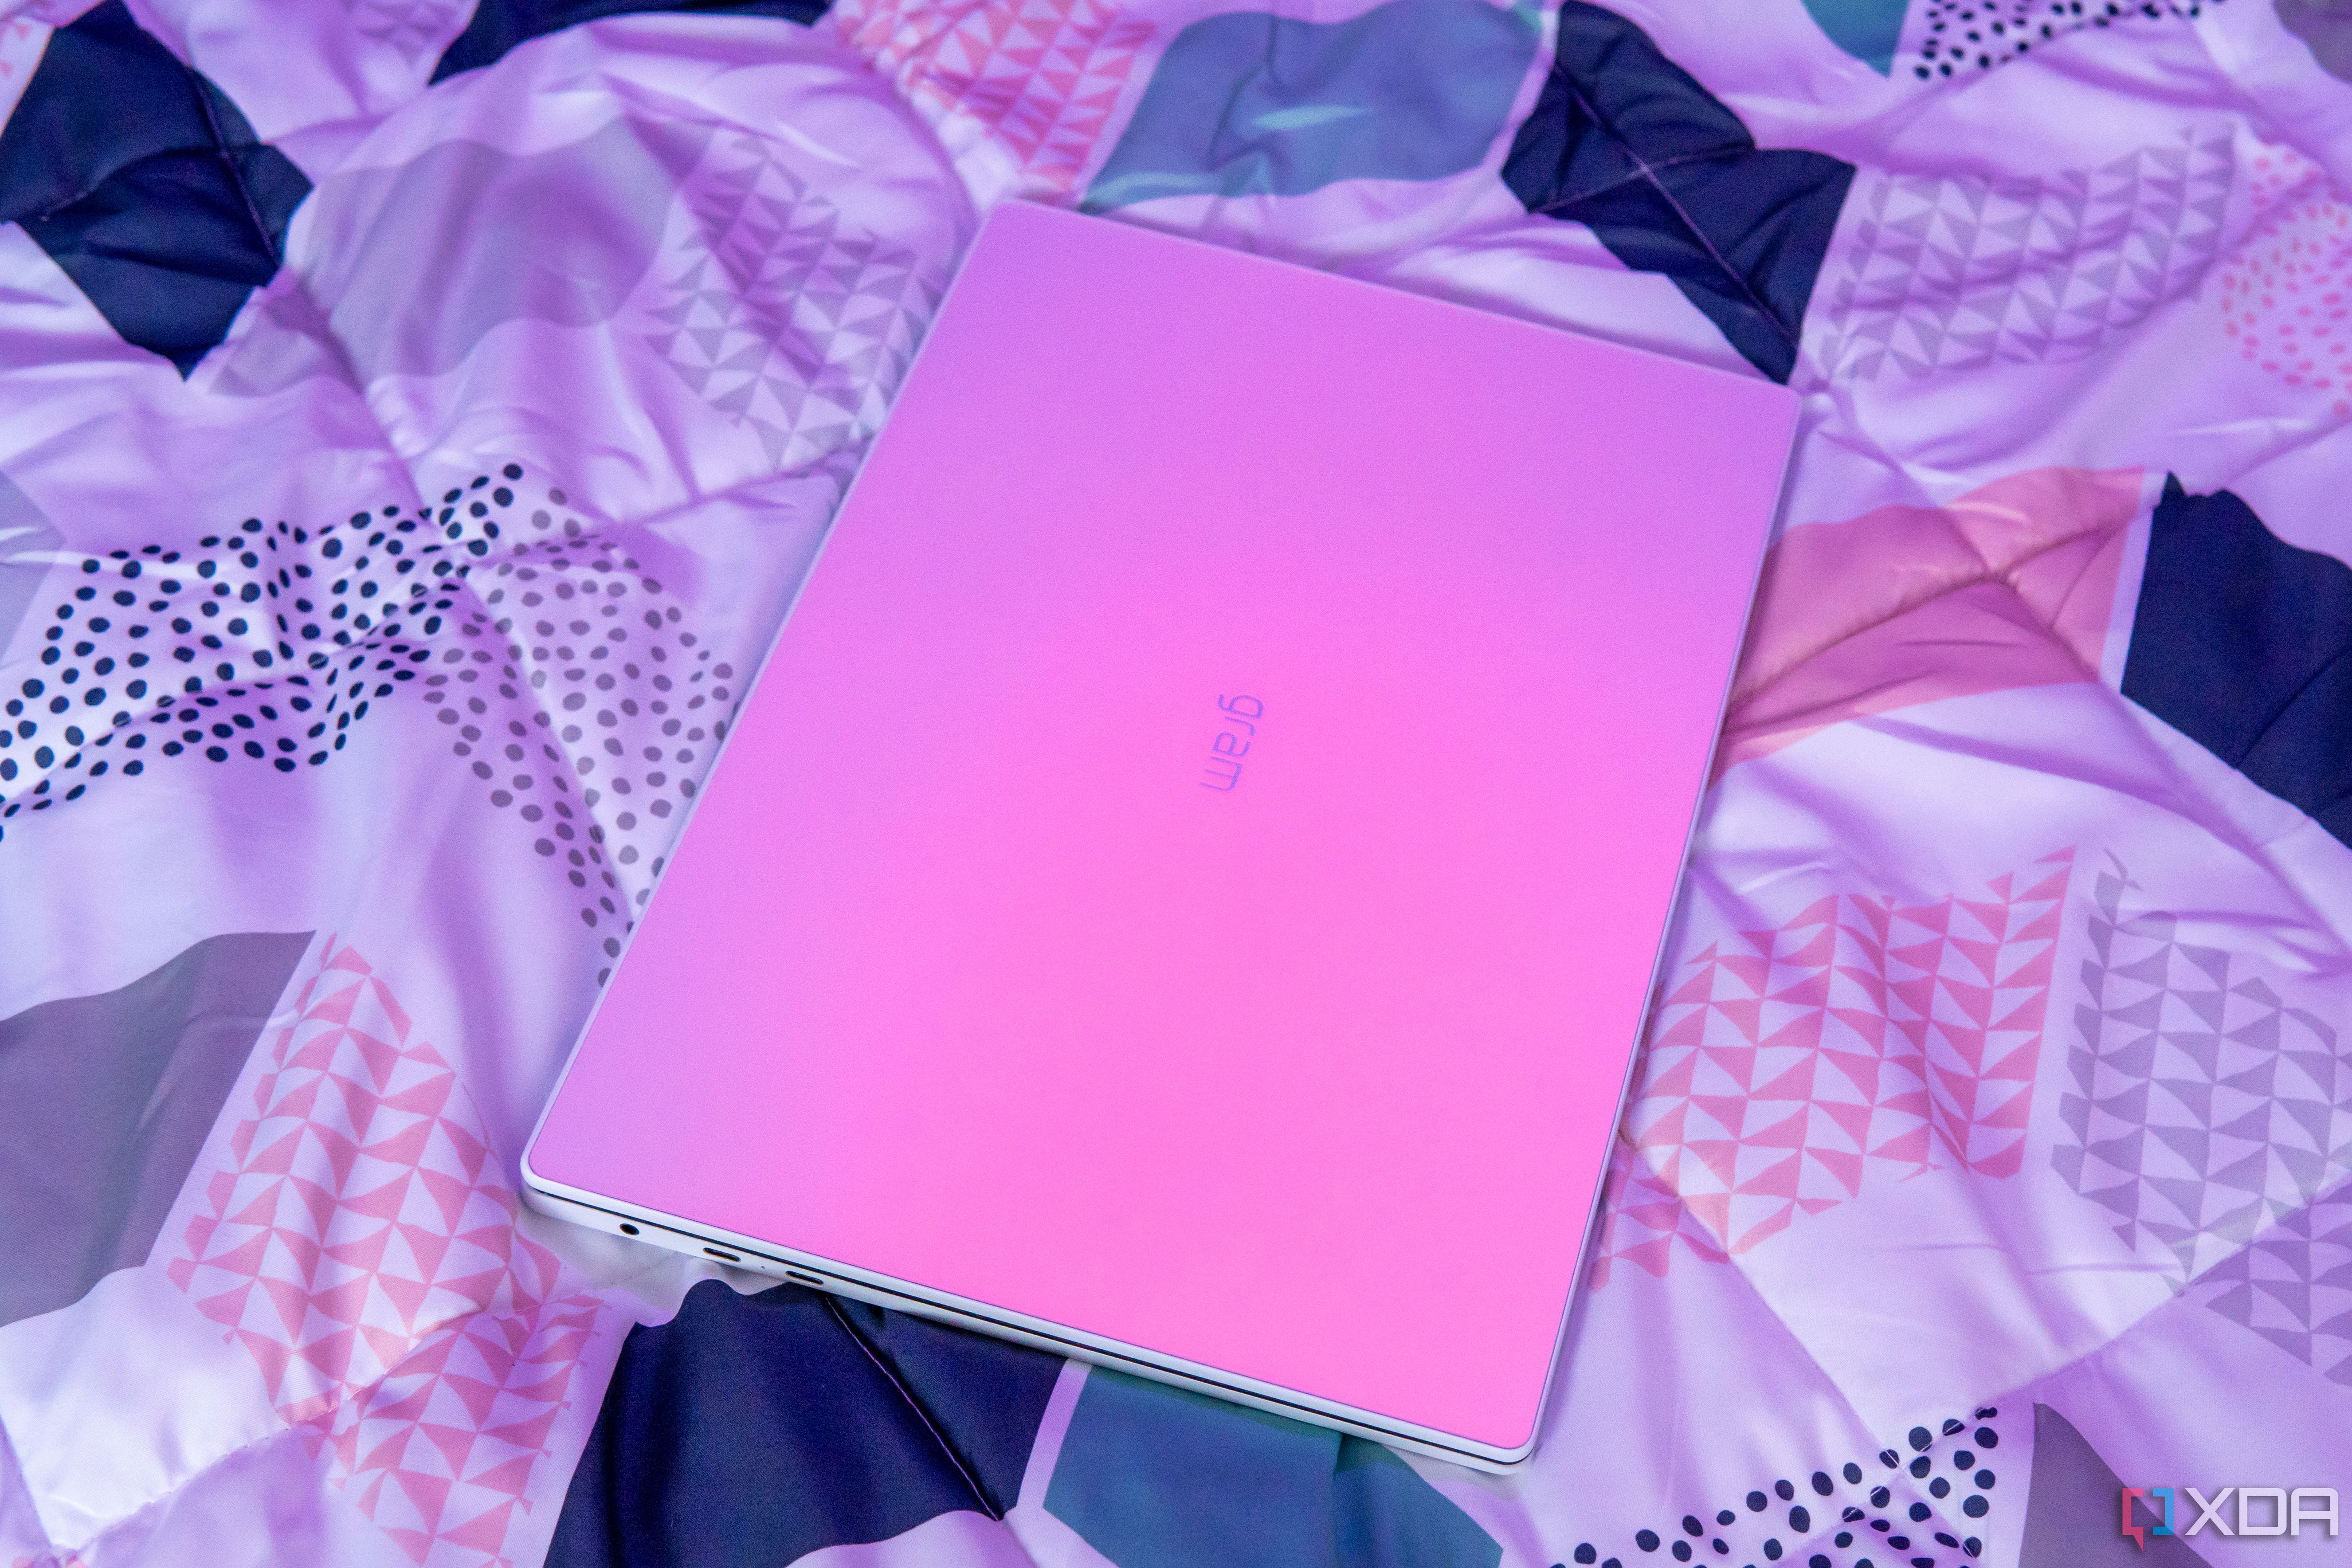 Angled view of the LG Gram Style under a pink light source, causing the glass surface to gain a pink hue